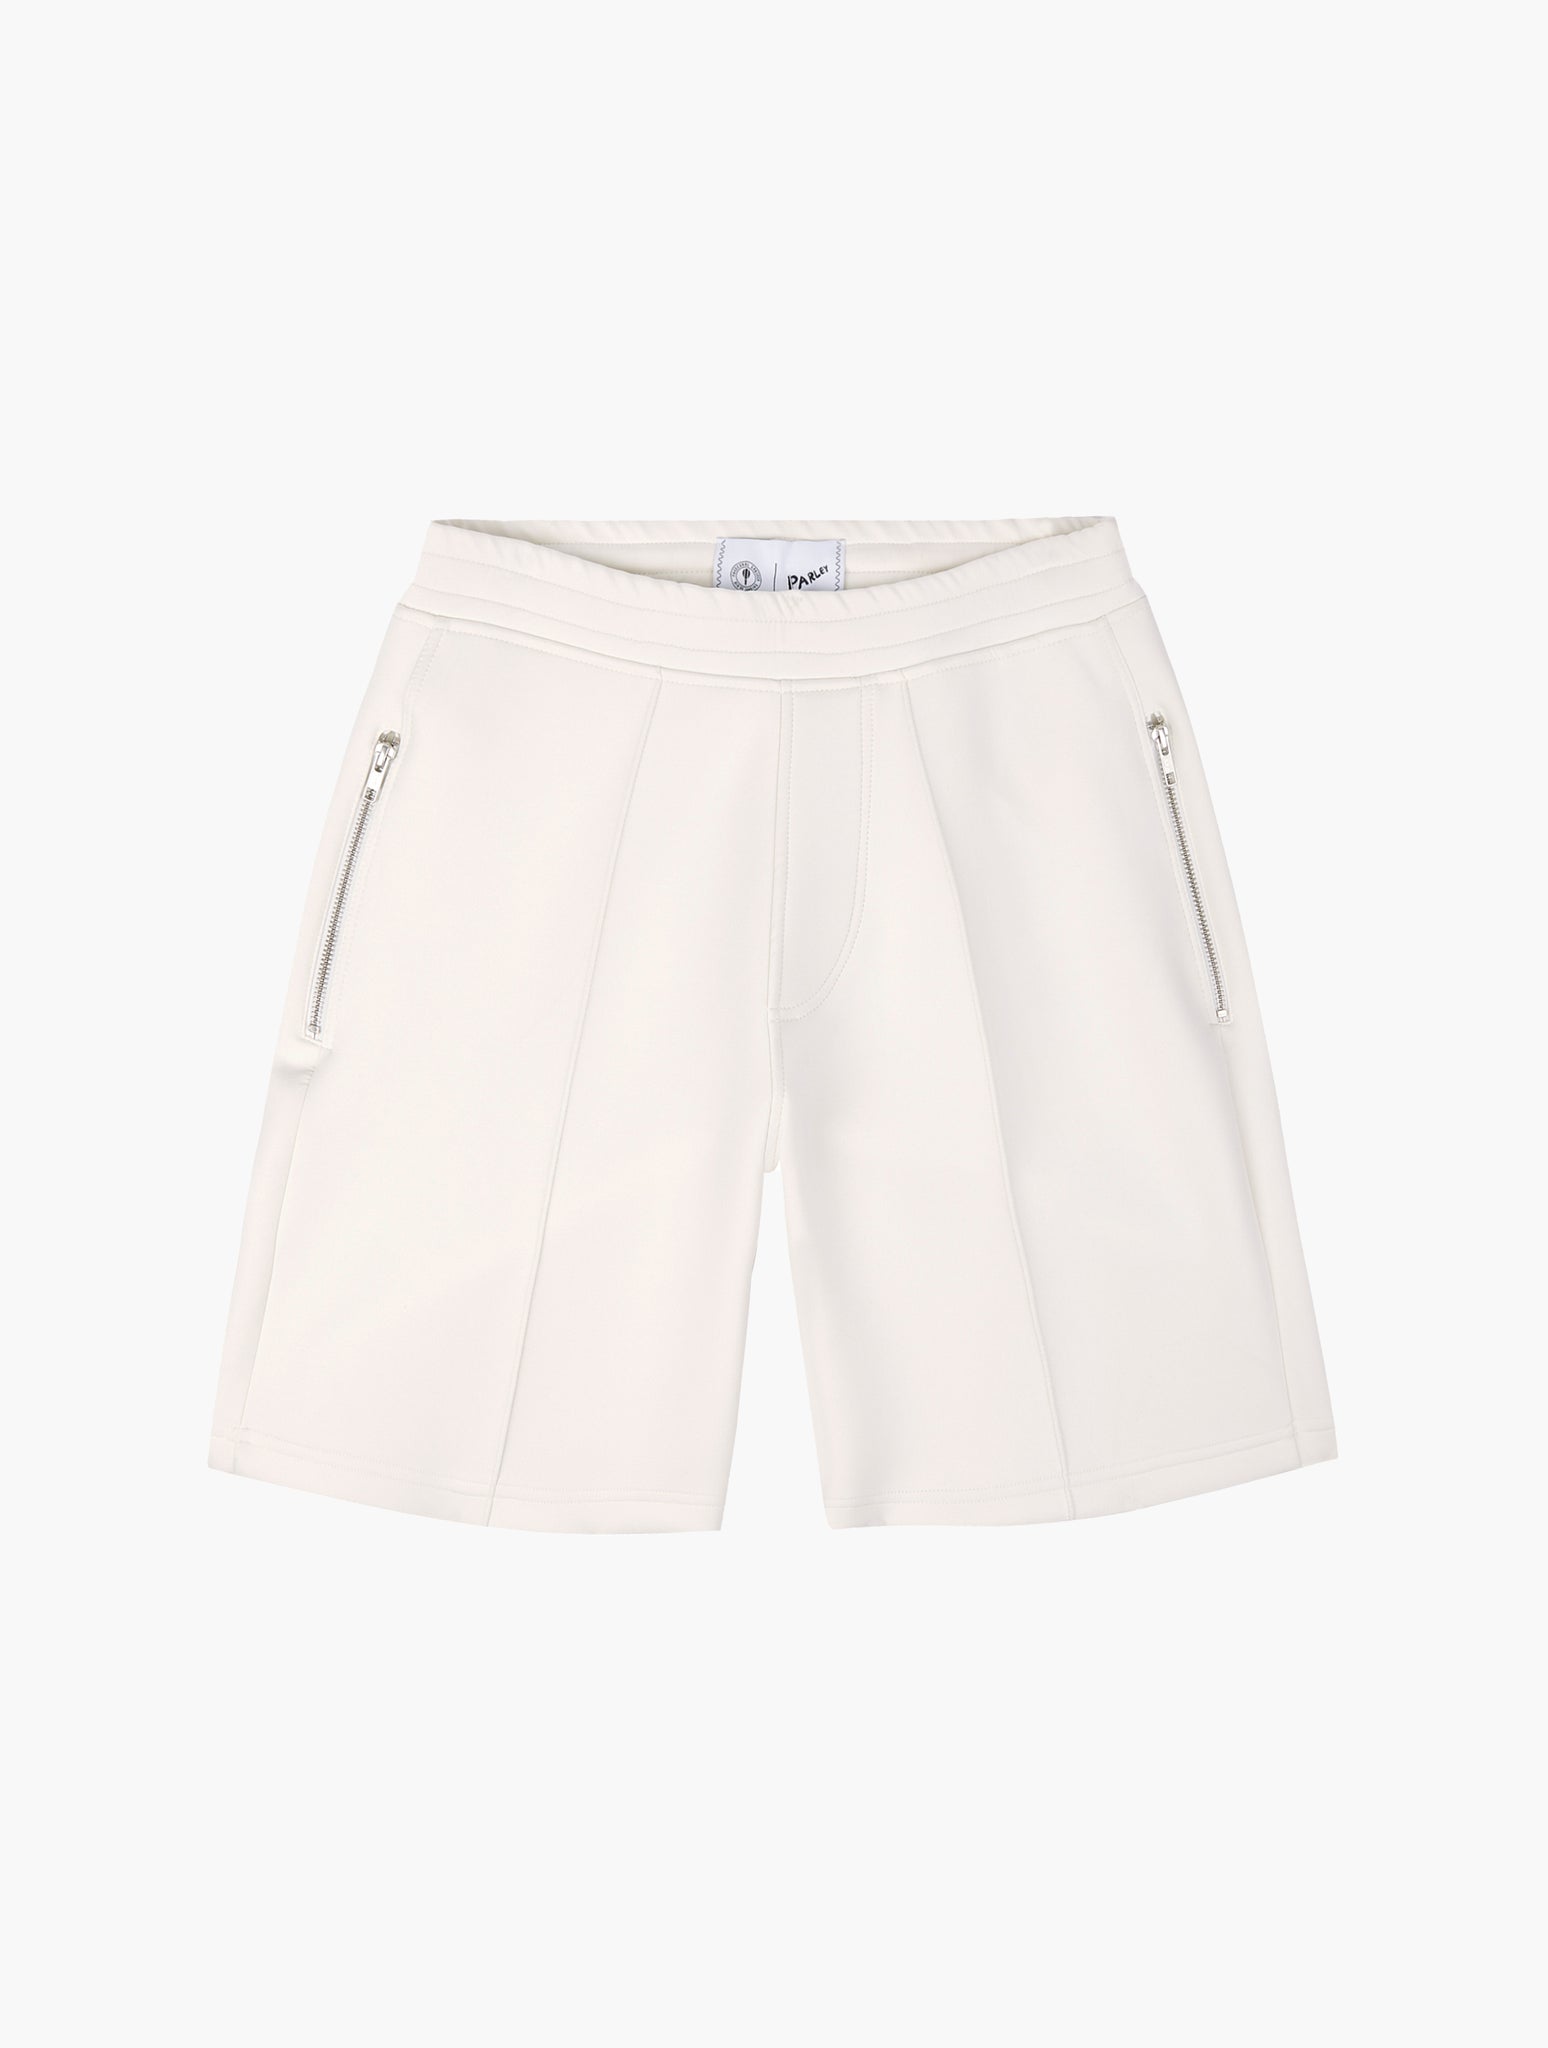 JAIME SWEAT SHORTS X PARLEY FOR THE OCEANS